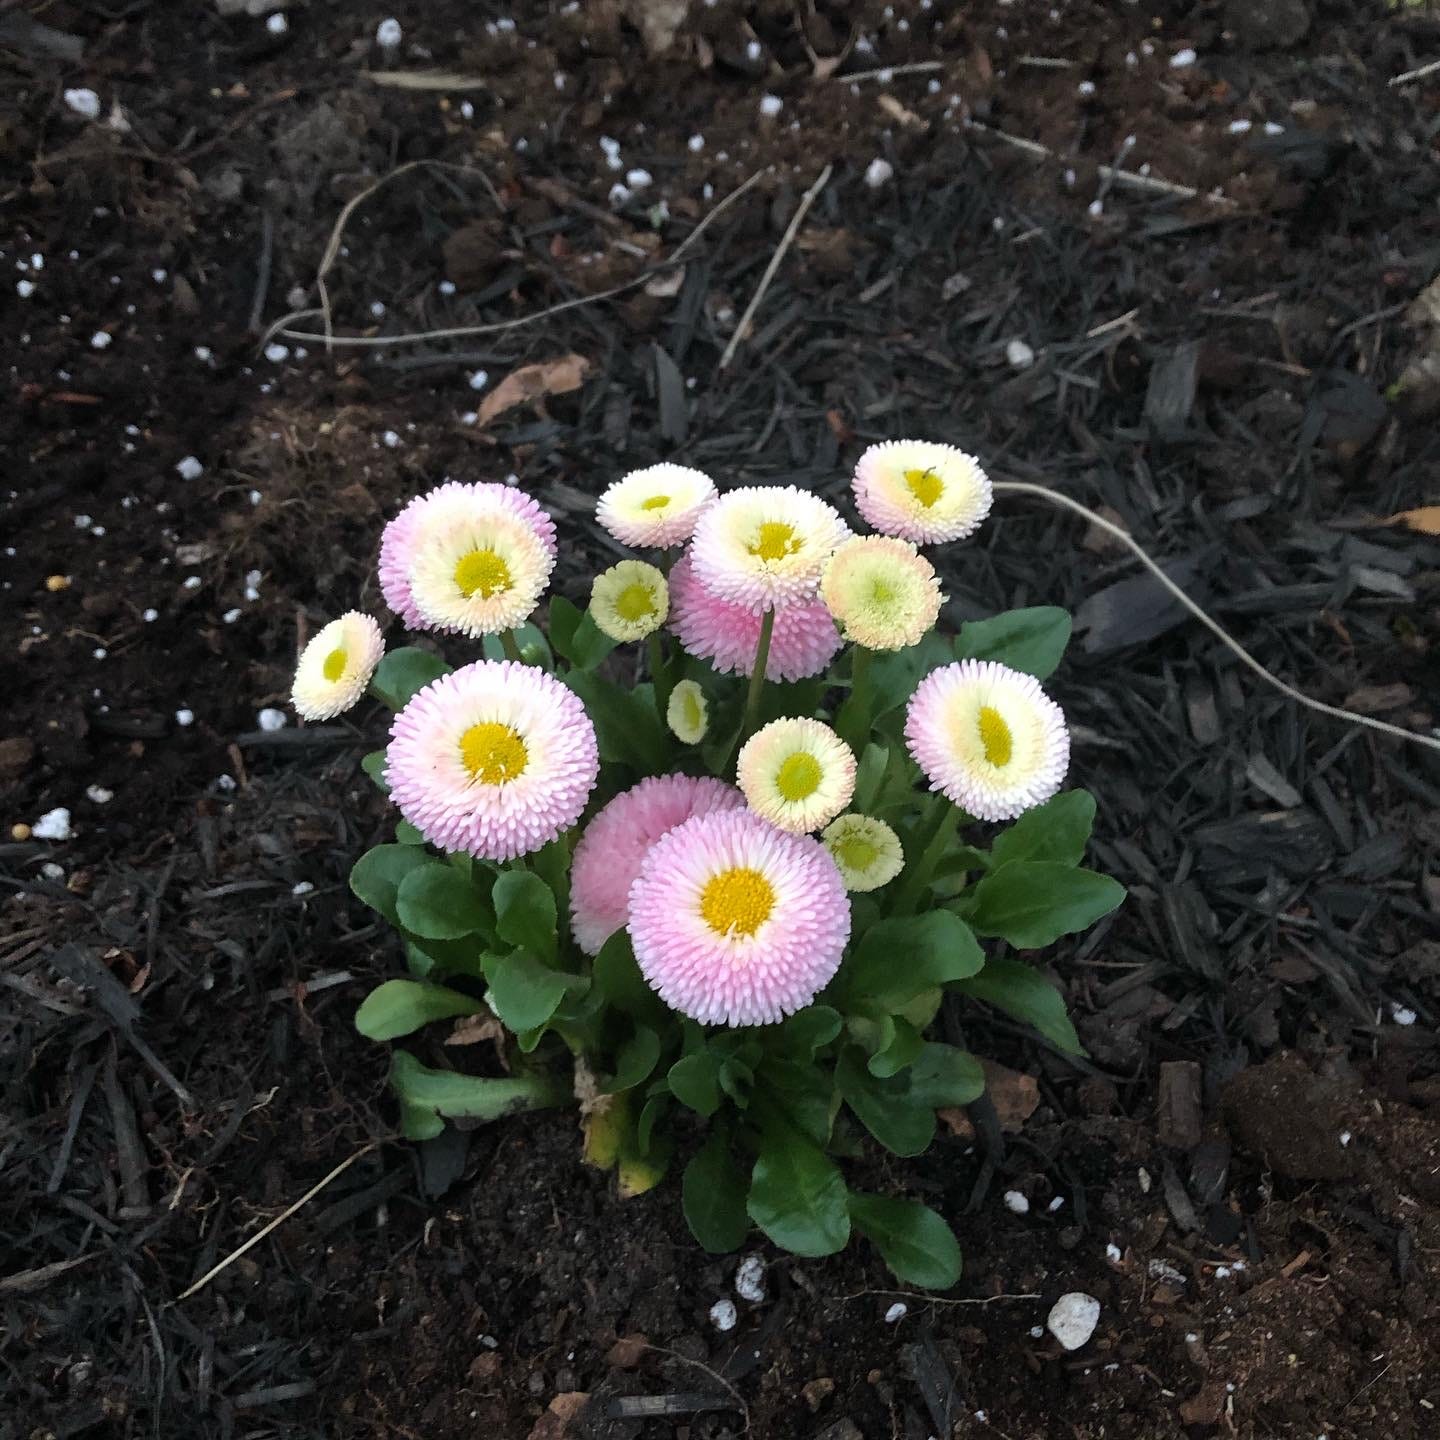 Common daisies, cute and button-like, white inside and pink at the edges.